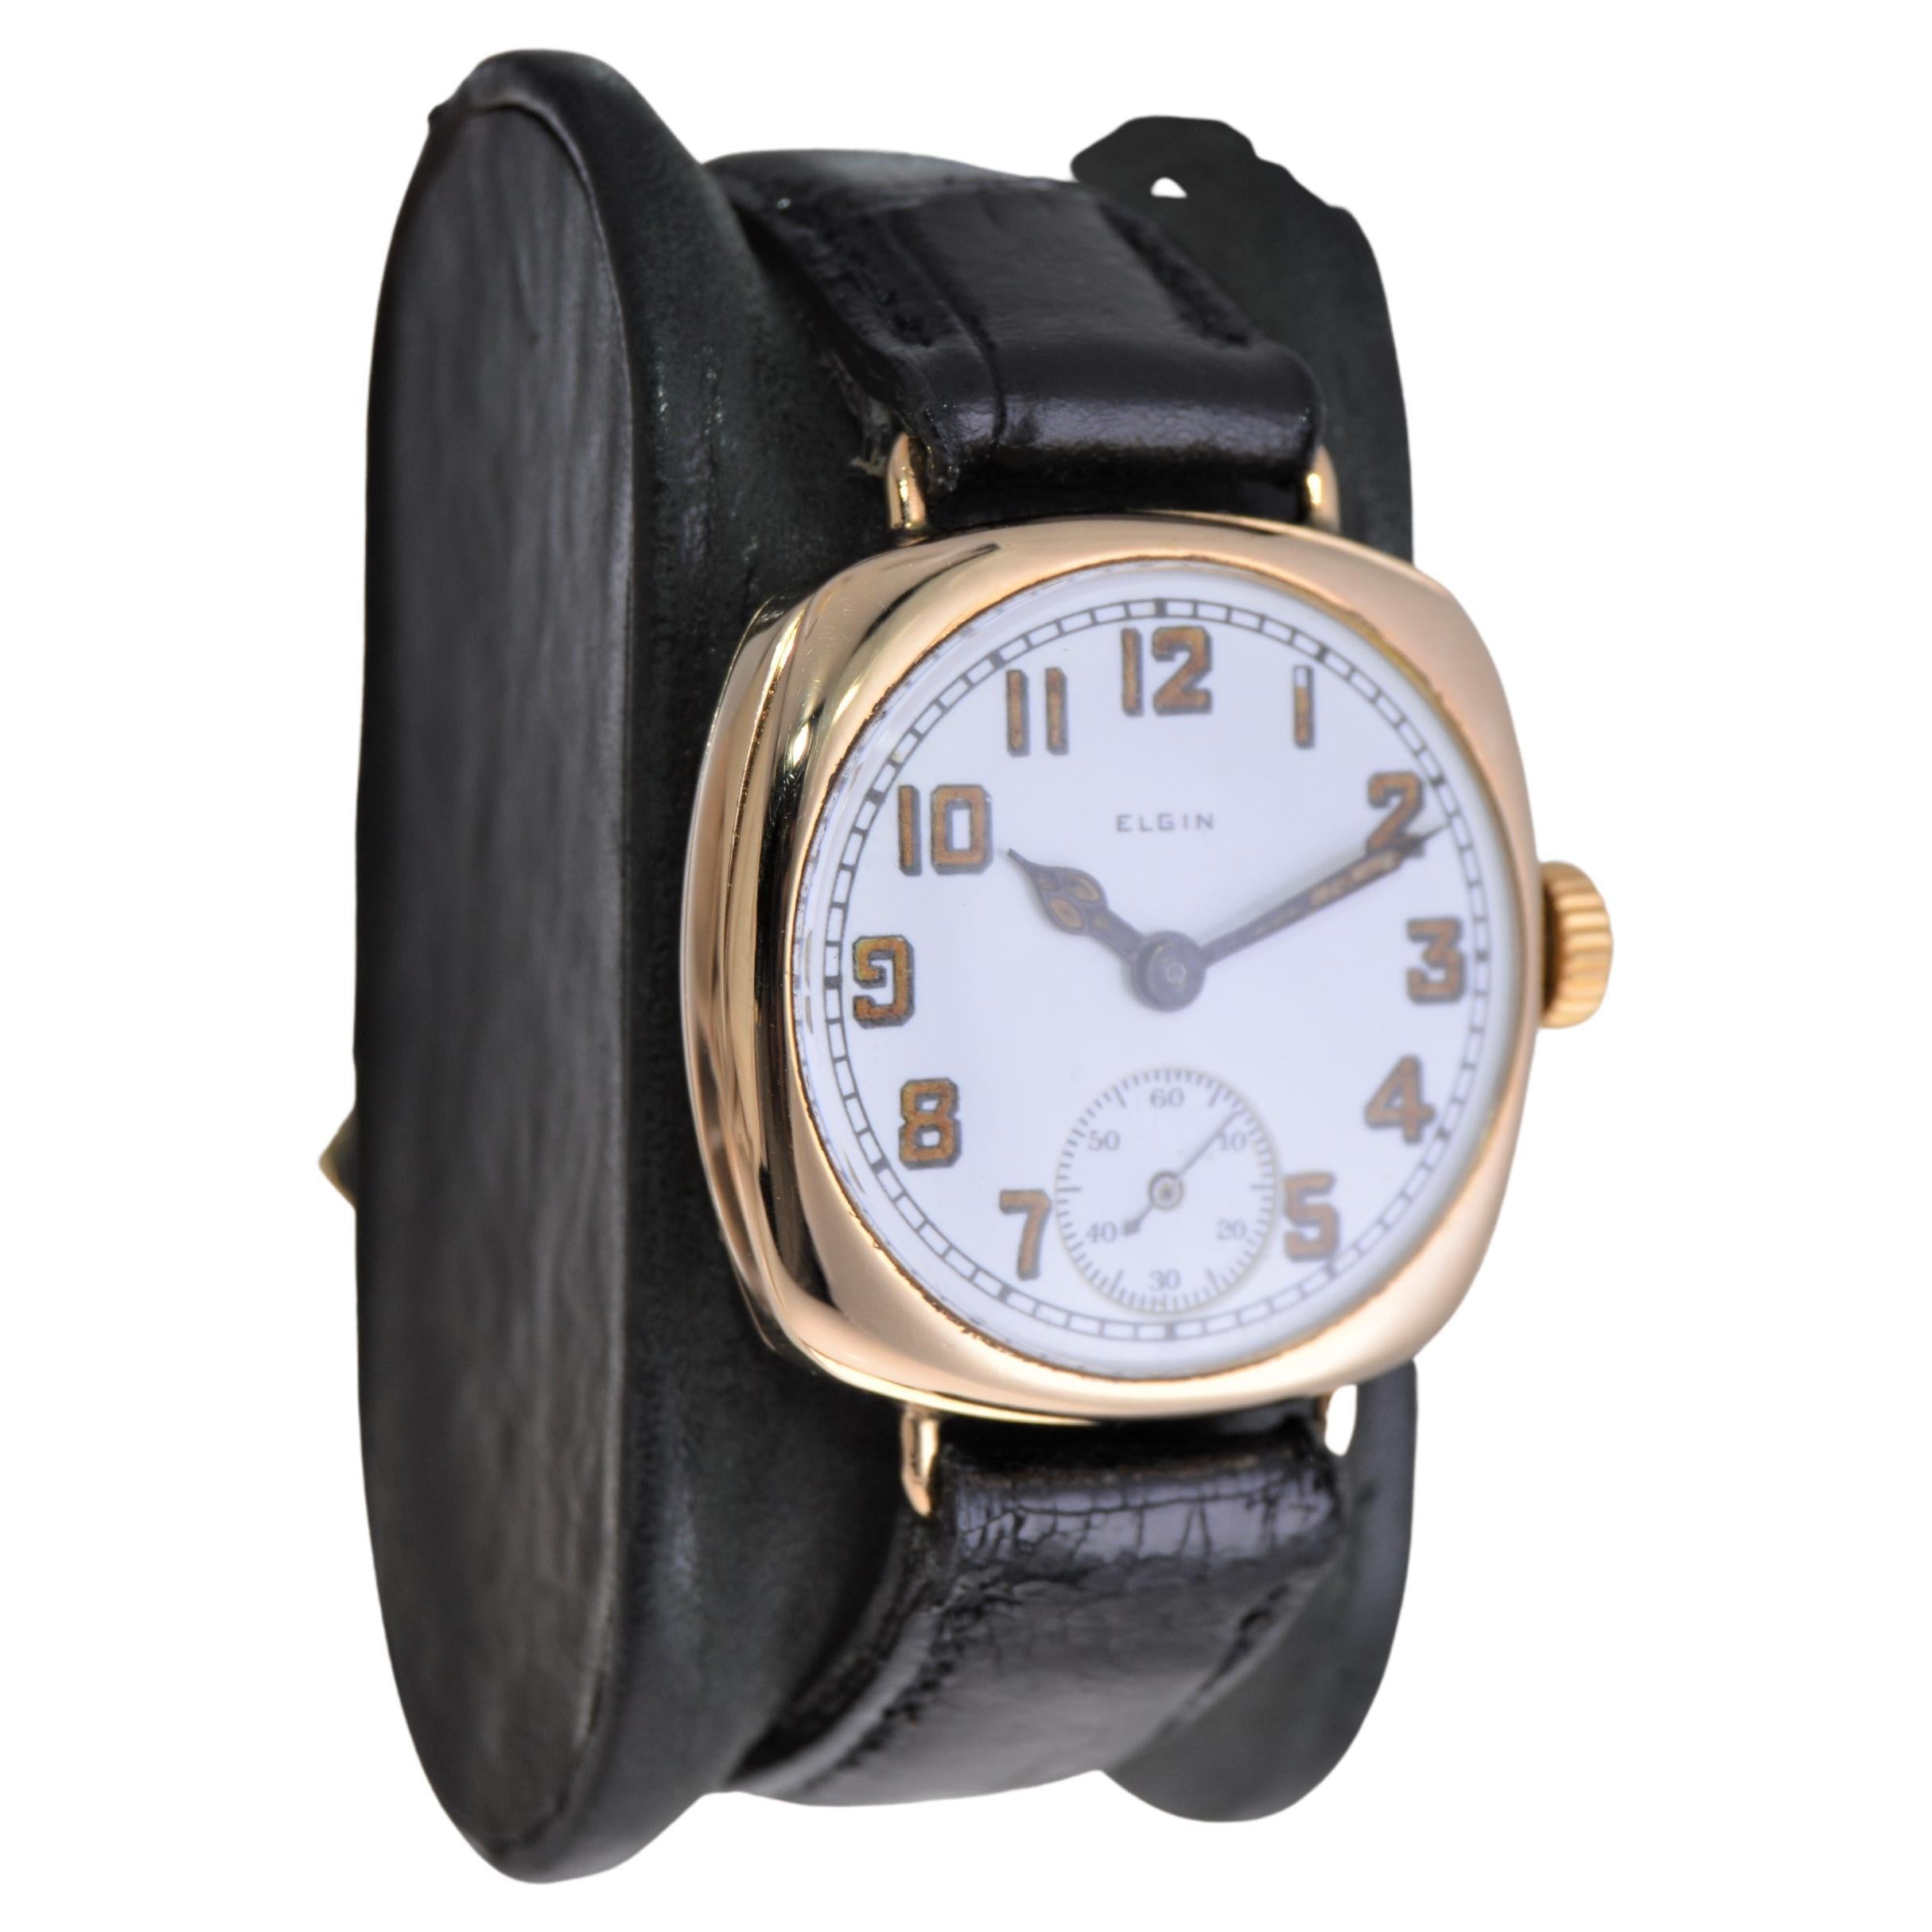 FACTORY / HOUSE: Elgin Watch Company
STYLE / REFERENCE: Cushion Shape 
METAL / MATERIAL: 14k Solid Yellow Gold
CIRCA / YEAR: 1896
DIMENSIONS / SIZE:  Length 40mm X Wide 32mm
MOVEMENT / CALIBER: Manual Winding / 16 Jewels / Caliber 3/0 size / High